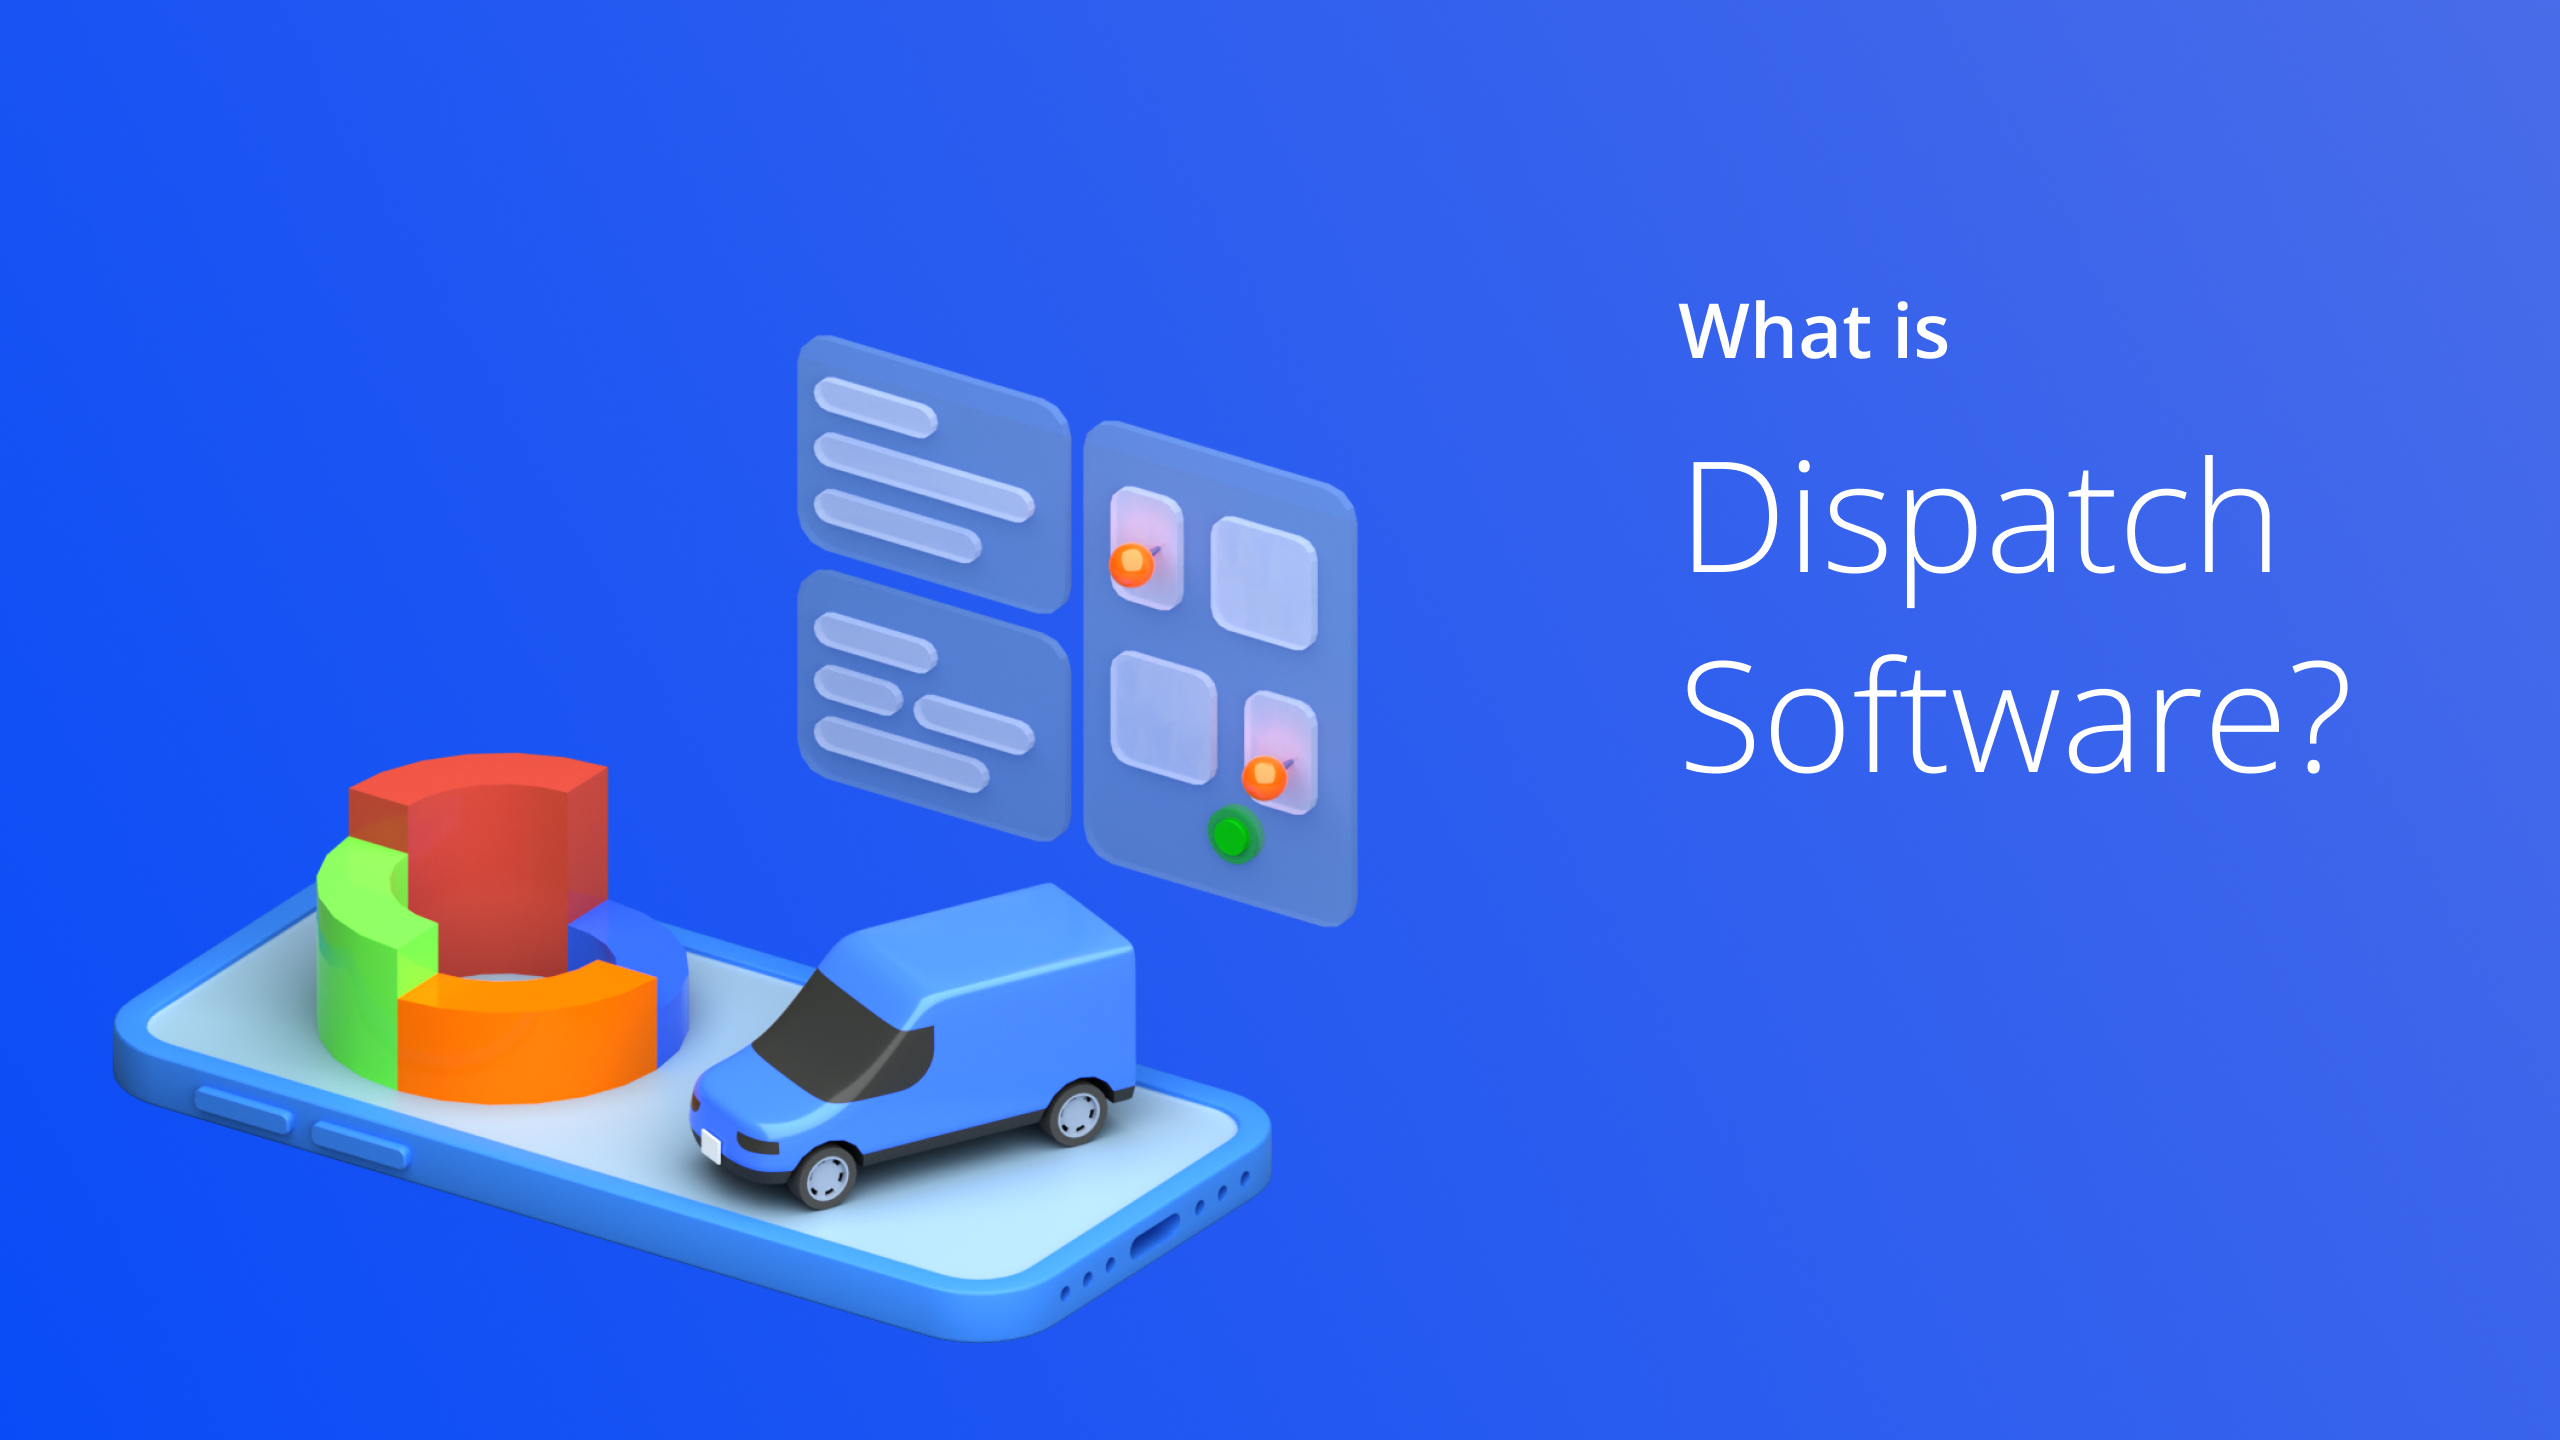 Custom Image - What Is Dispatch Software?